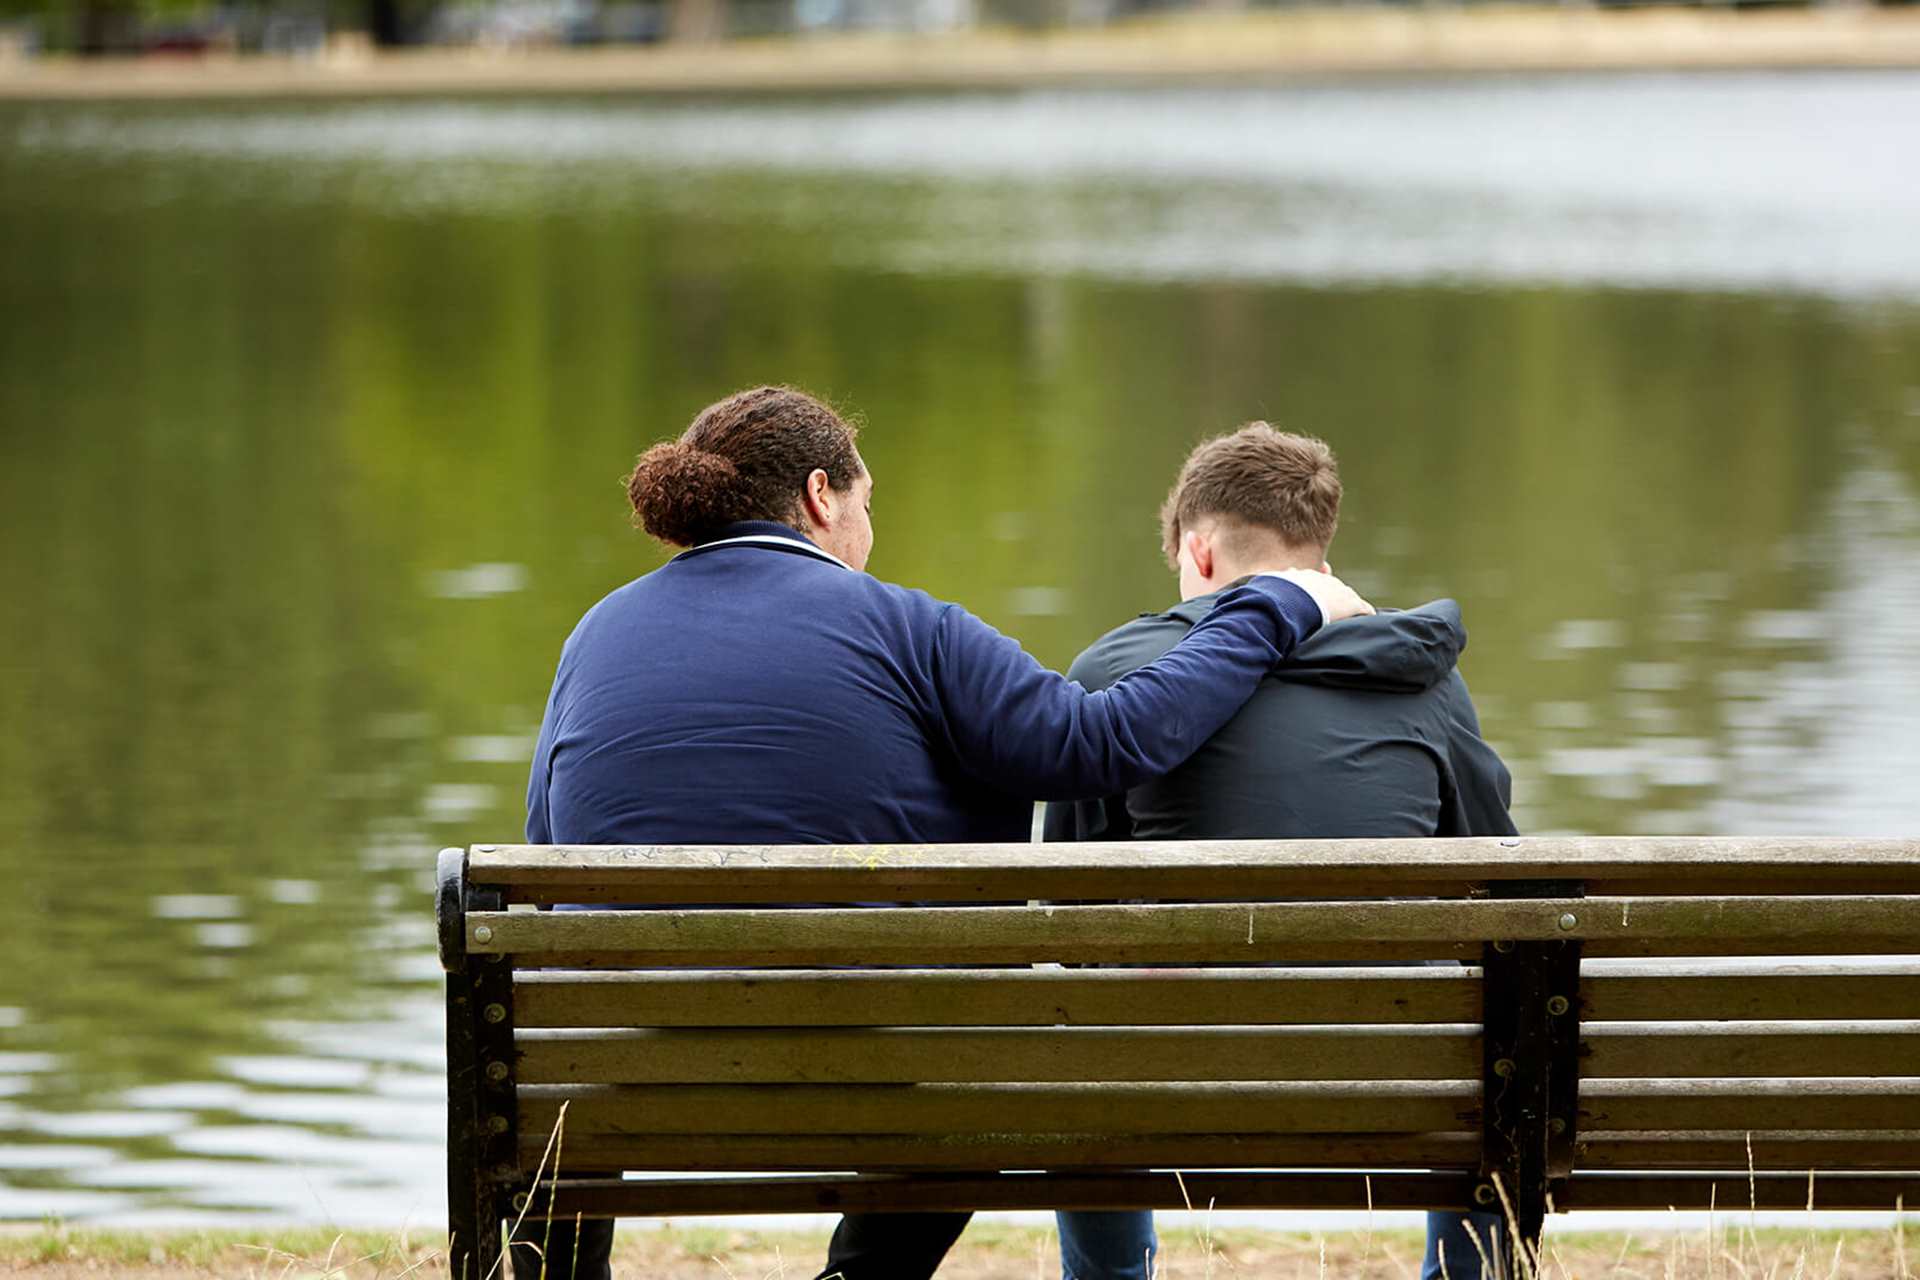 Two young men sit on a park bench overlooking a lake. One has his arm on the other's shoulder to comfort him.